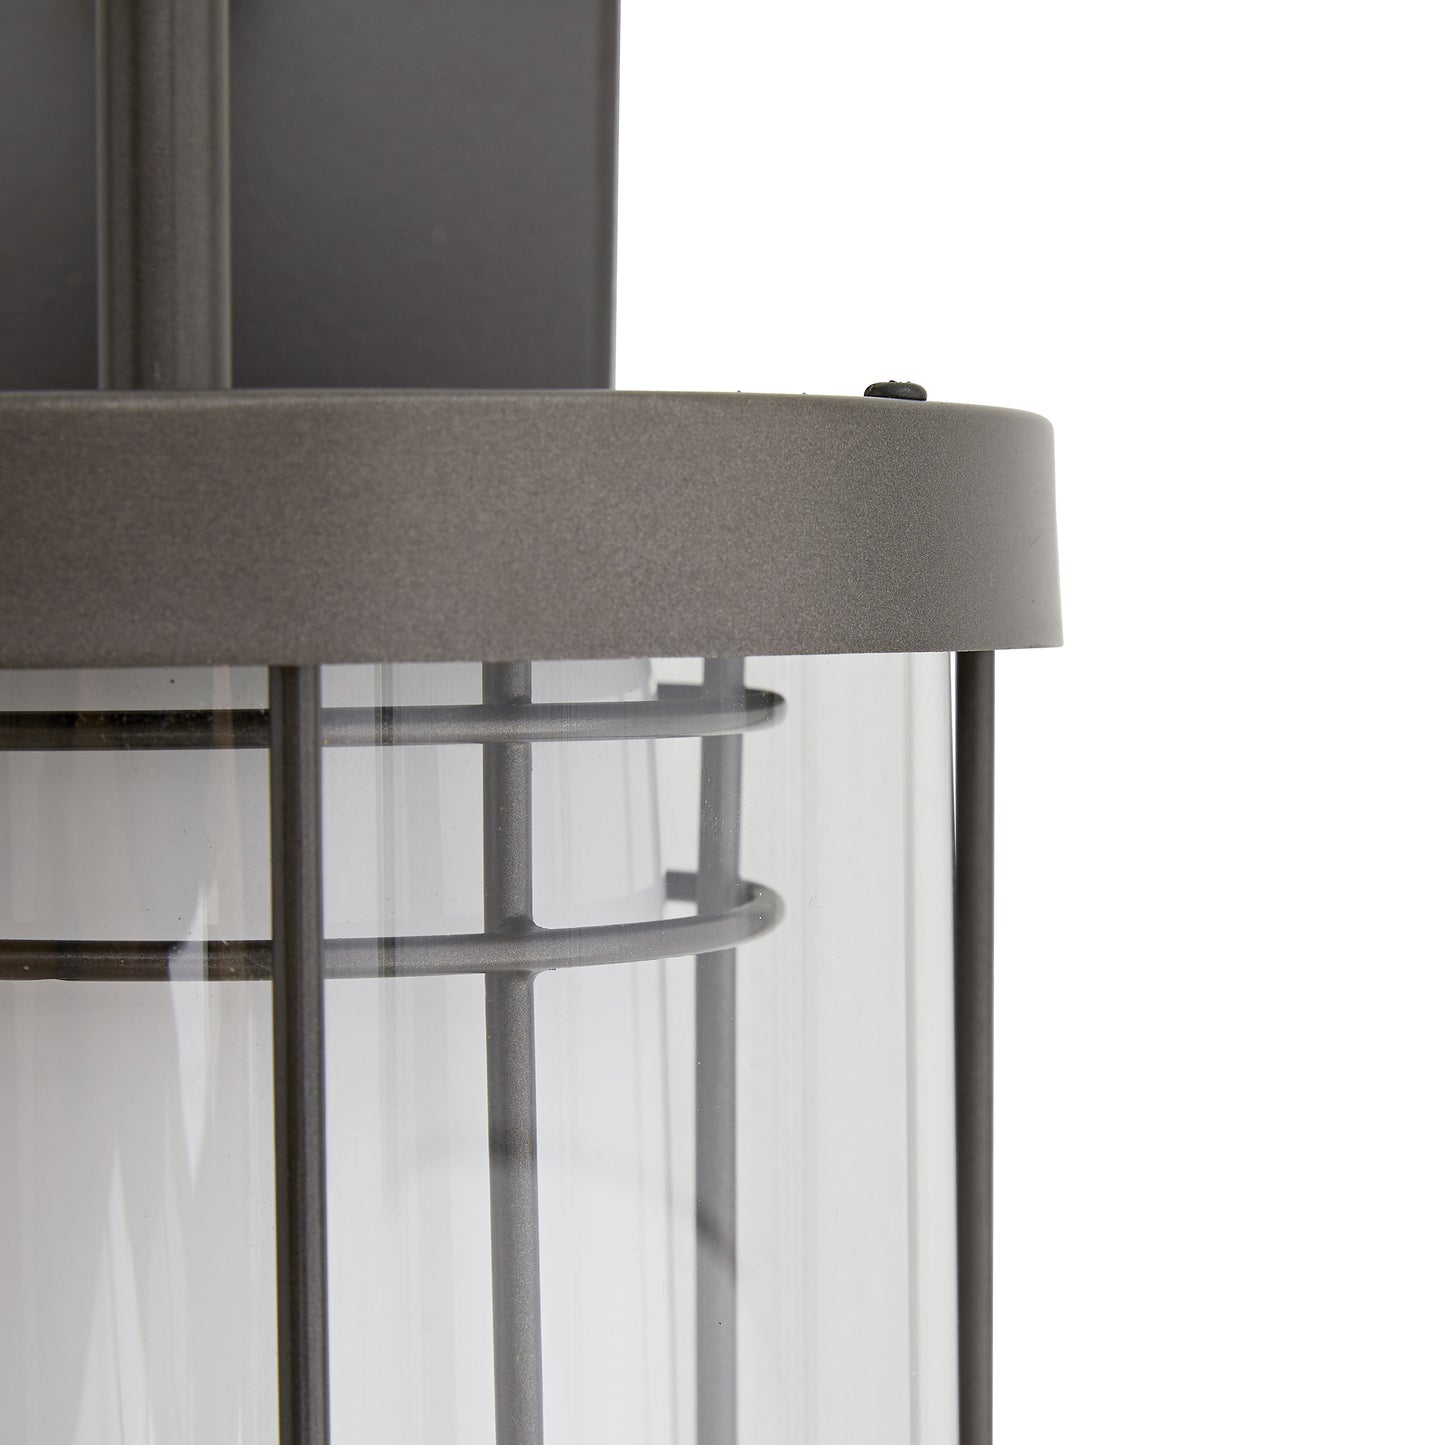 Evan Outdoor Sconce - Modern Lighting for Your Outdoor Spaces